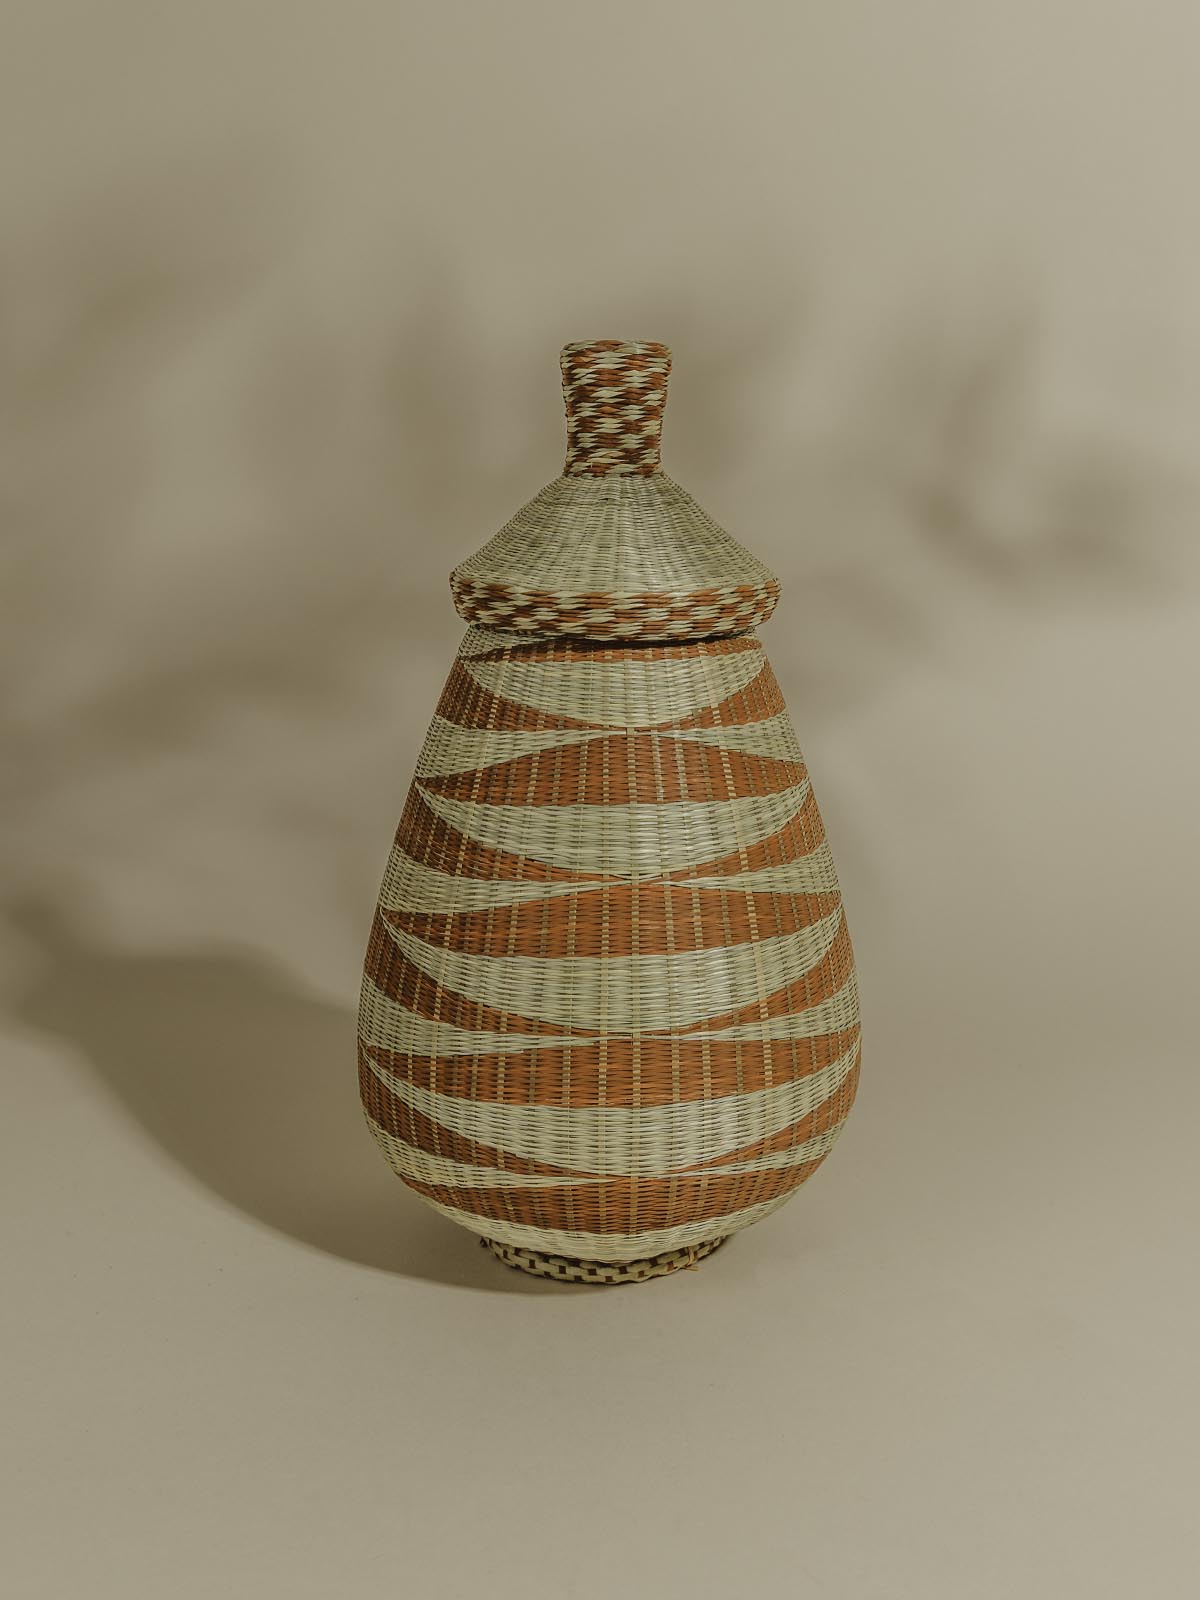 Tan and orange woven basket on a beige background